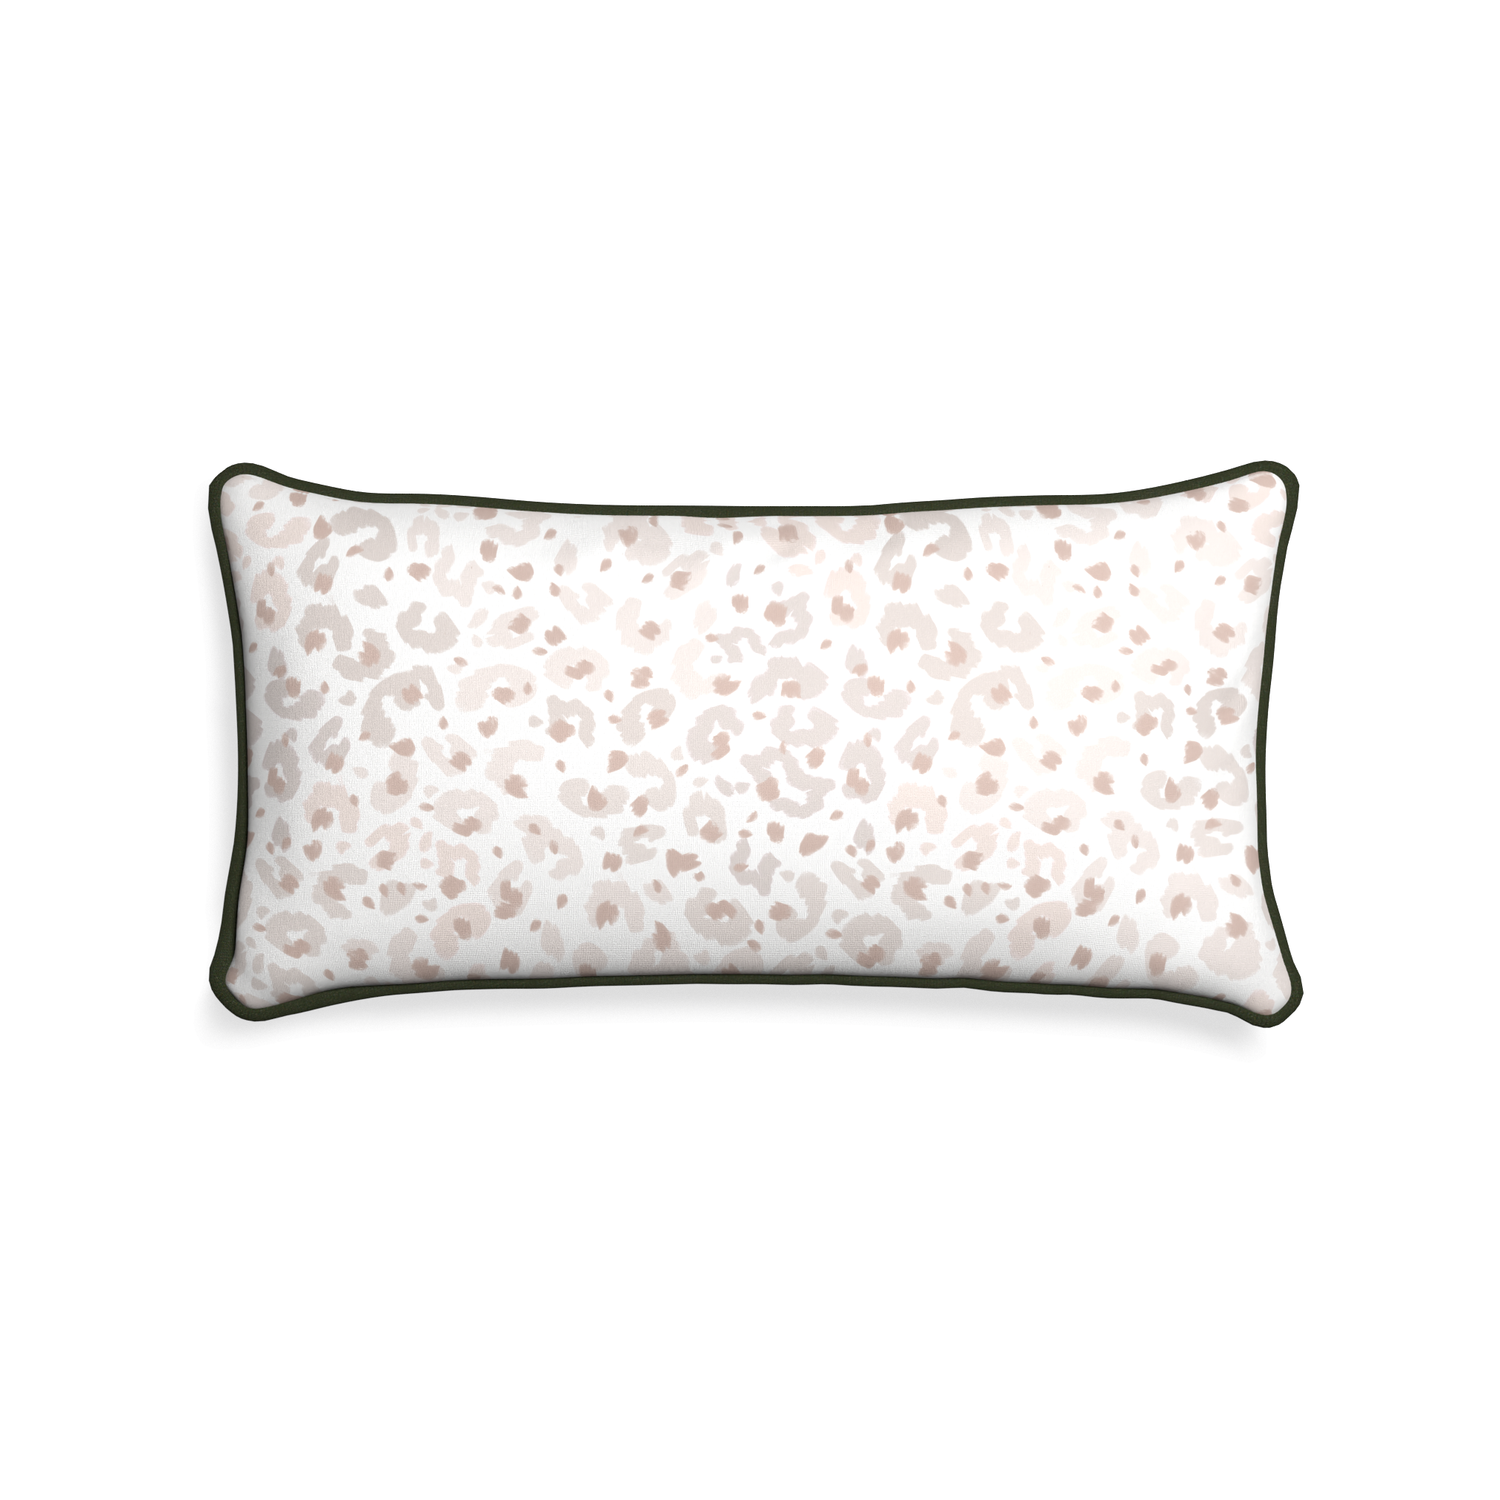 Midi-lumbar rosie custom beige animal printpillow with f piping on white background